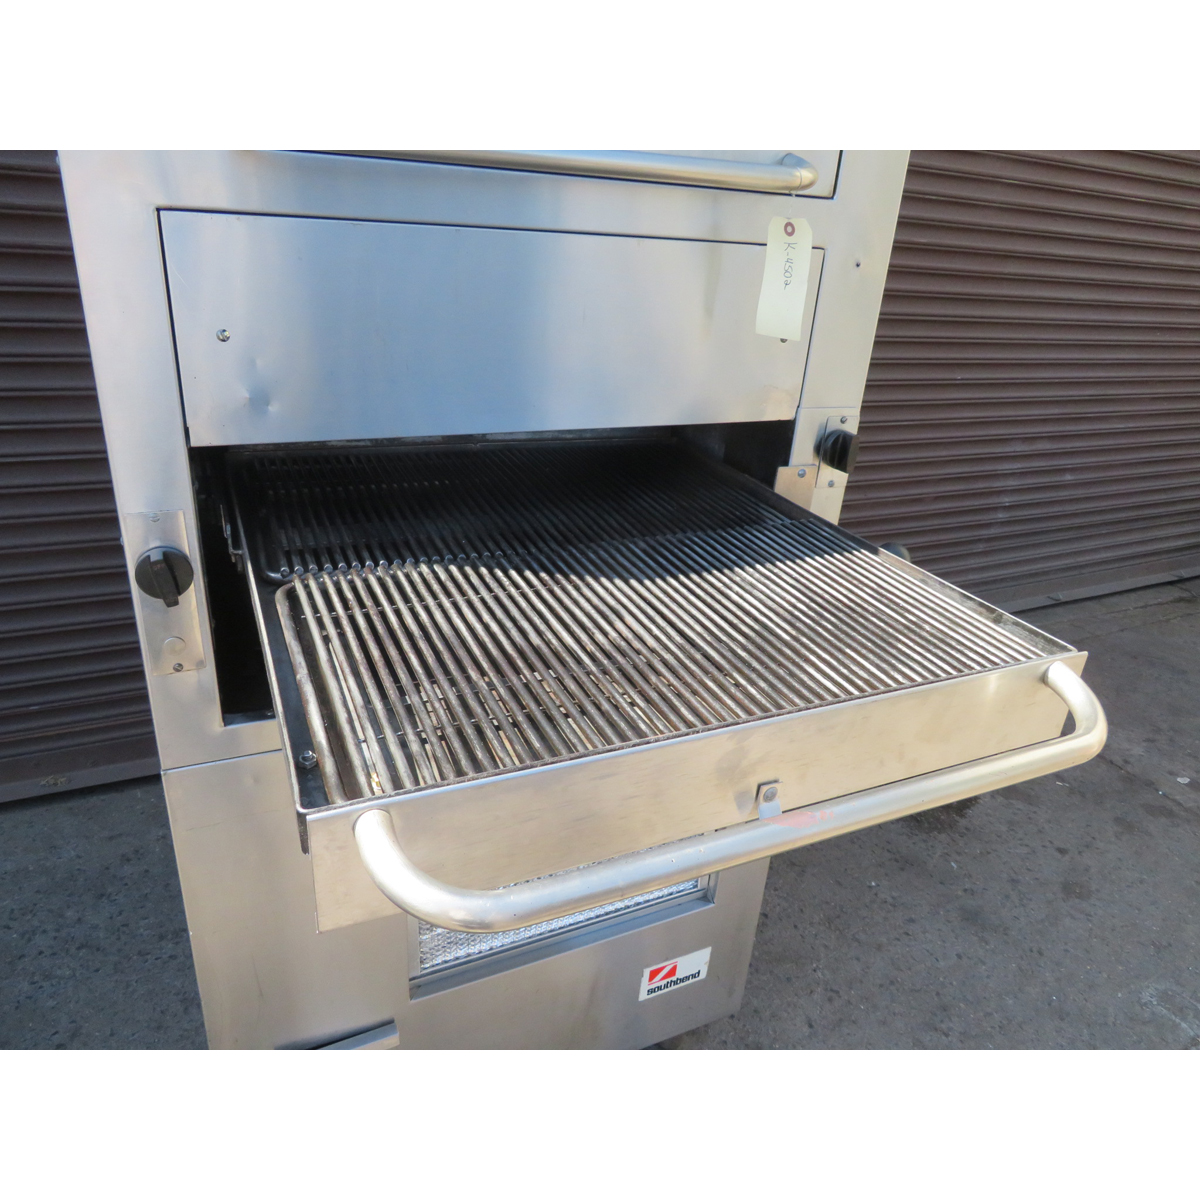 Southbend 171D Upright Infrared Broiler, Used Very Good Condition image 4